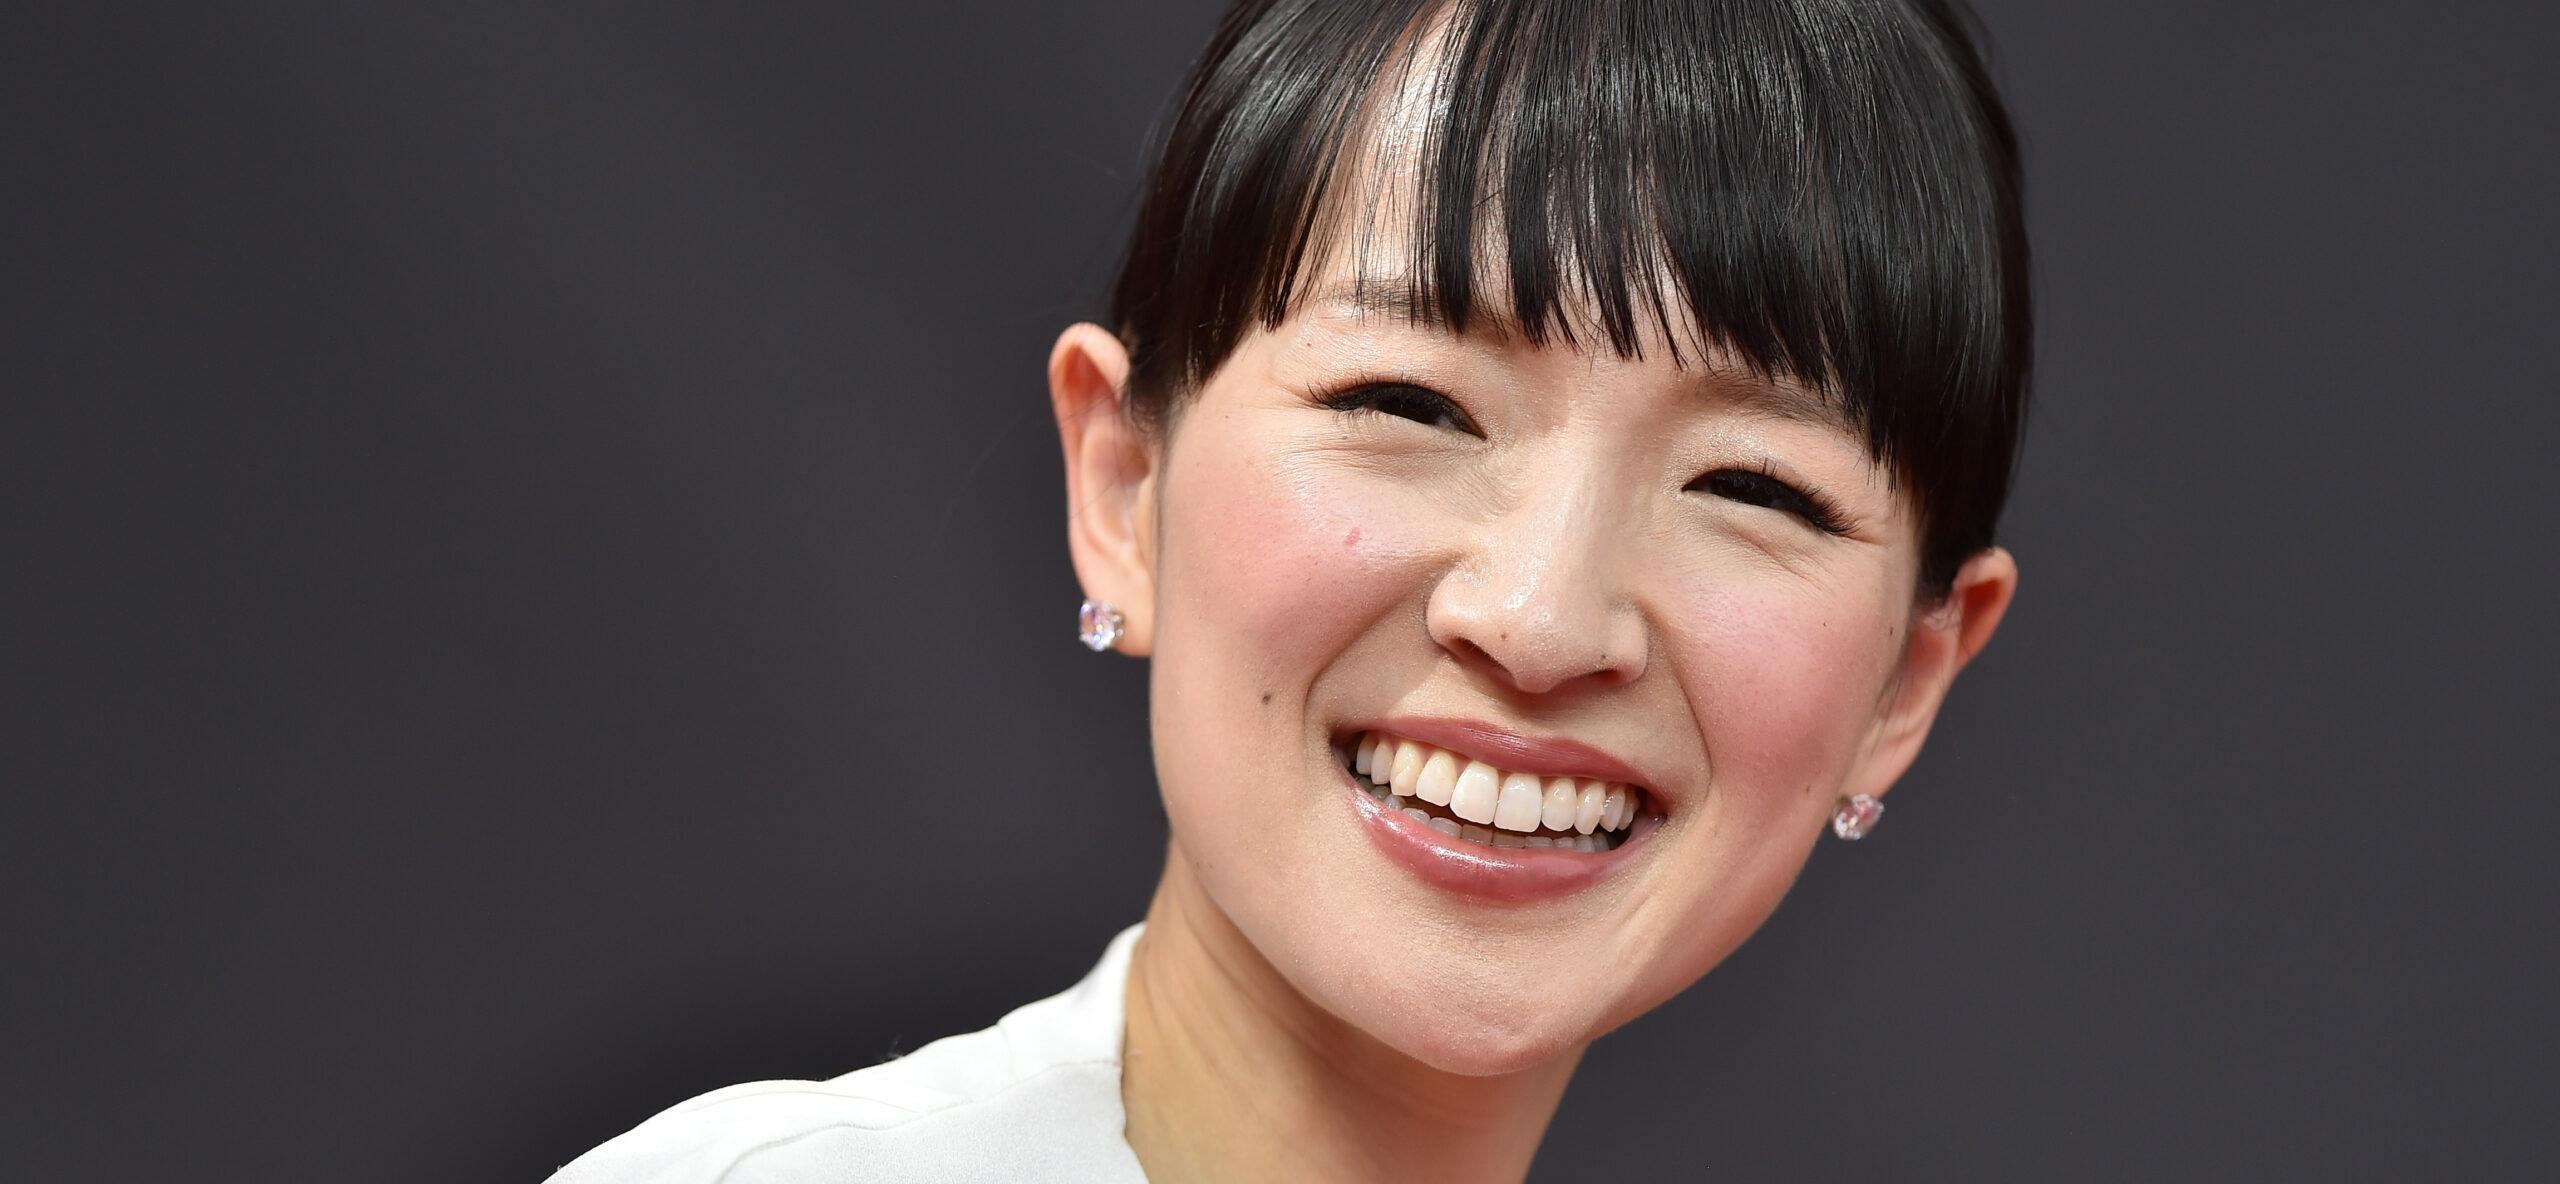 Marie Kondo Cleans Your Home, Swedish Death Cleaner Scrubs Your Soul